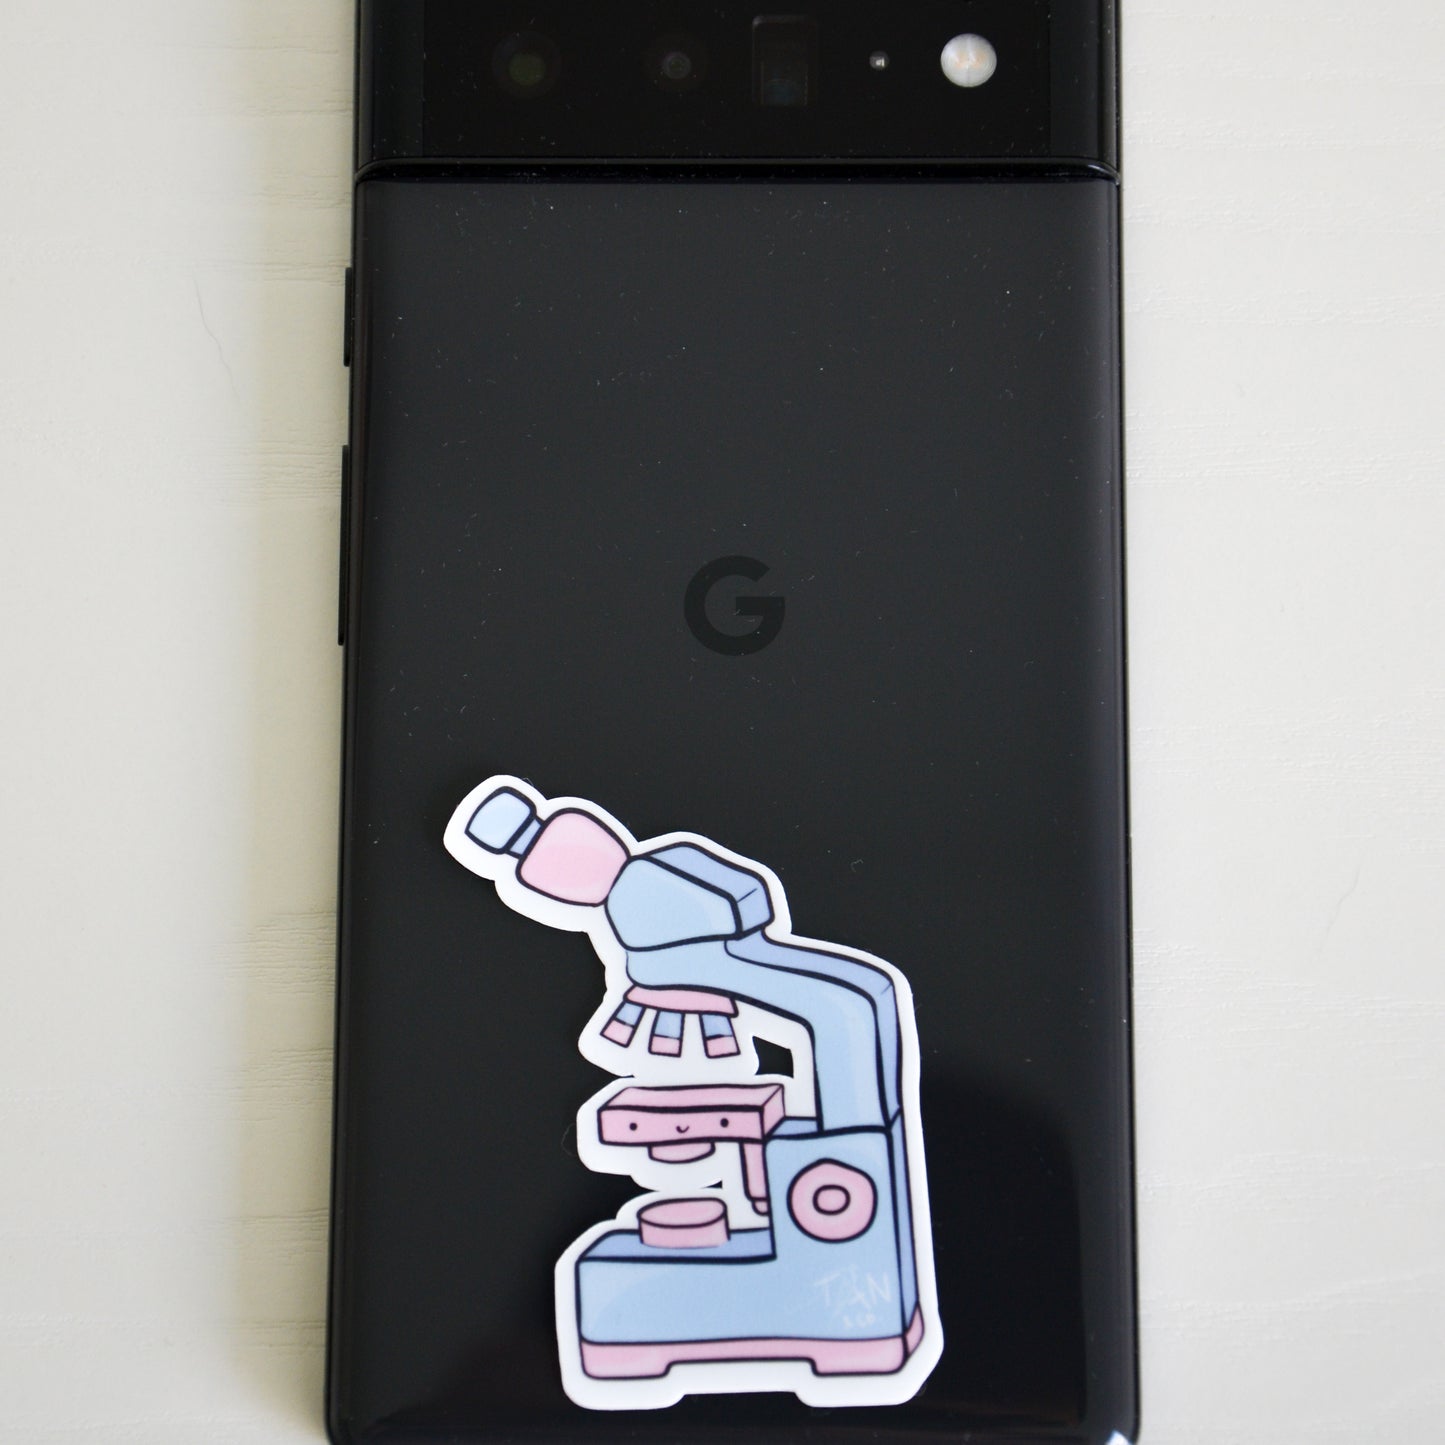 Pink and blue microscope sticker on phone